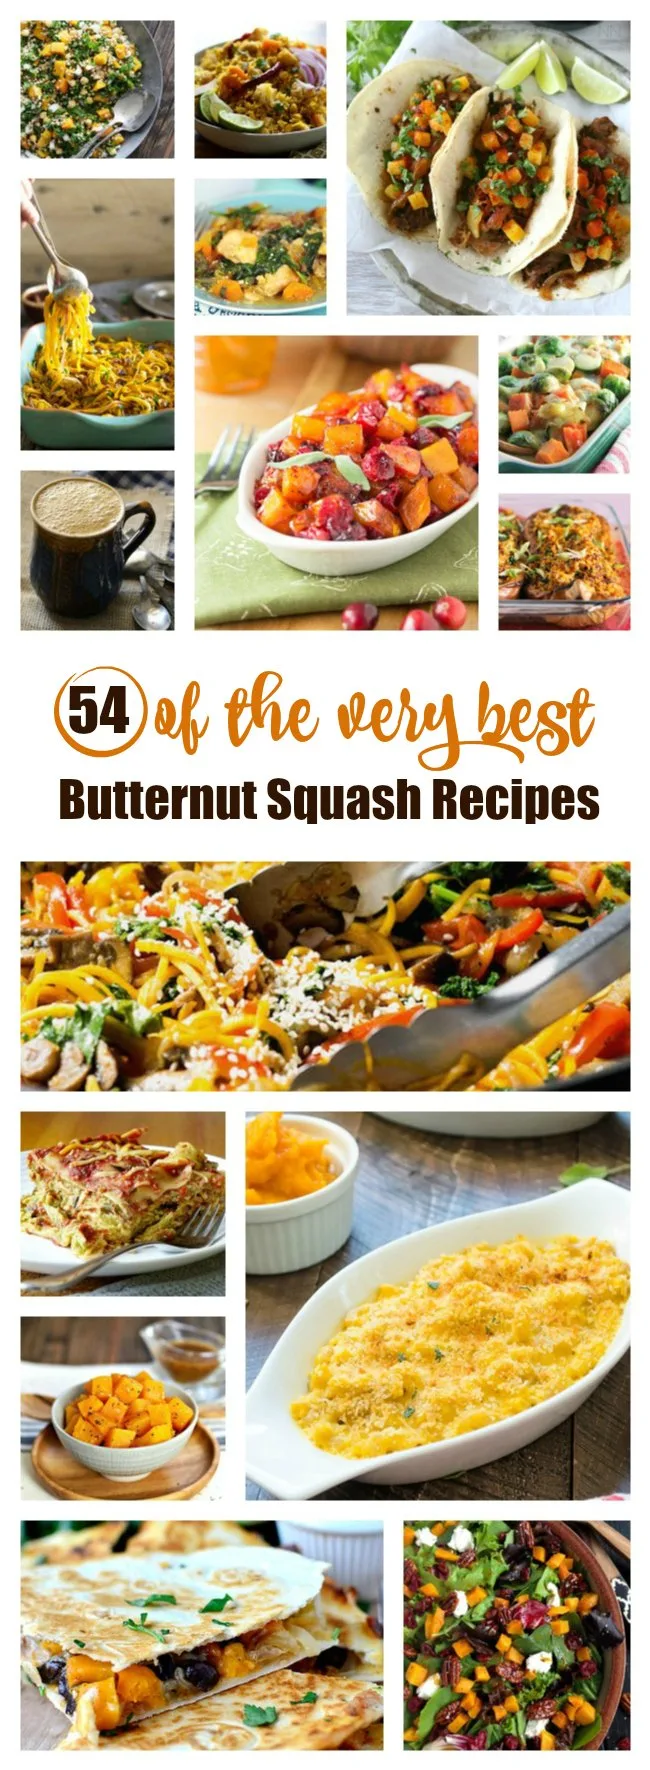 Nom nom. Butternut Squash is THE MAN. Here are endless recipes to try.